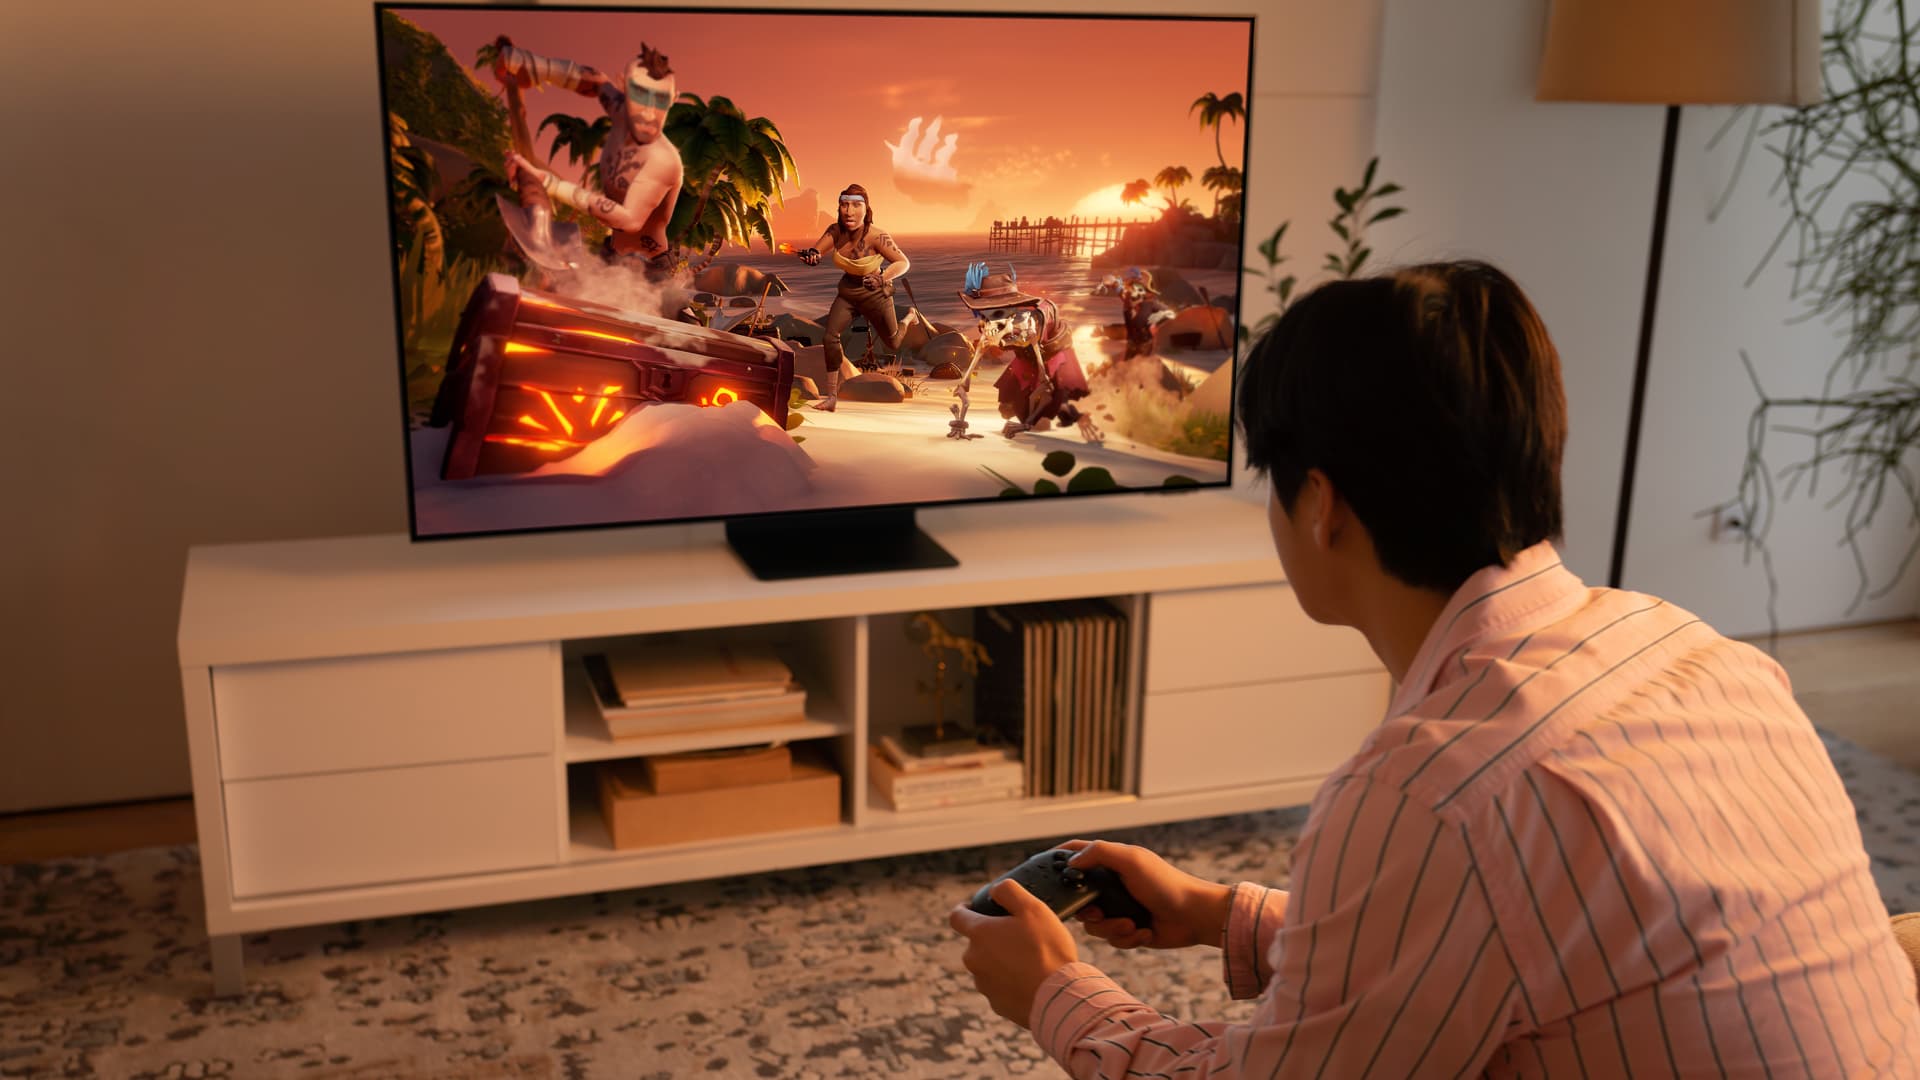 Microsoft is bringing Xbox Game Pass cloud streaming to smart TVs, so users don’t need a console